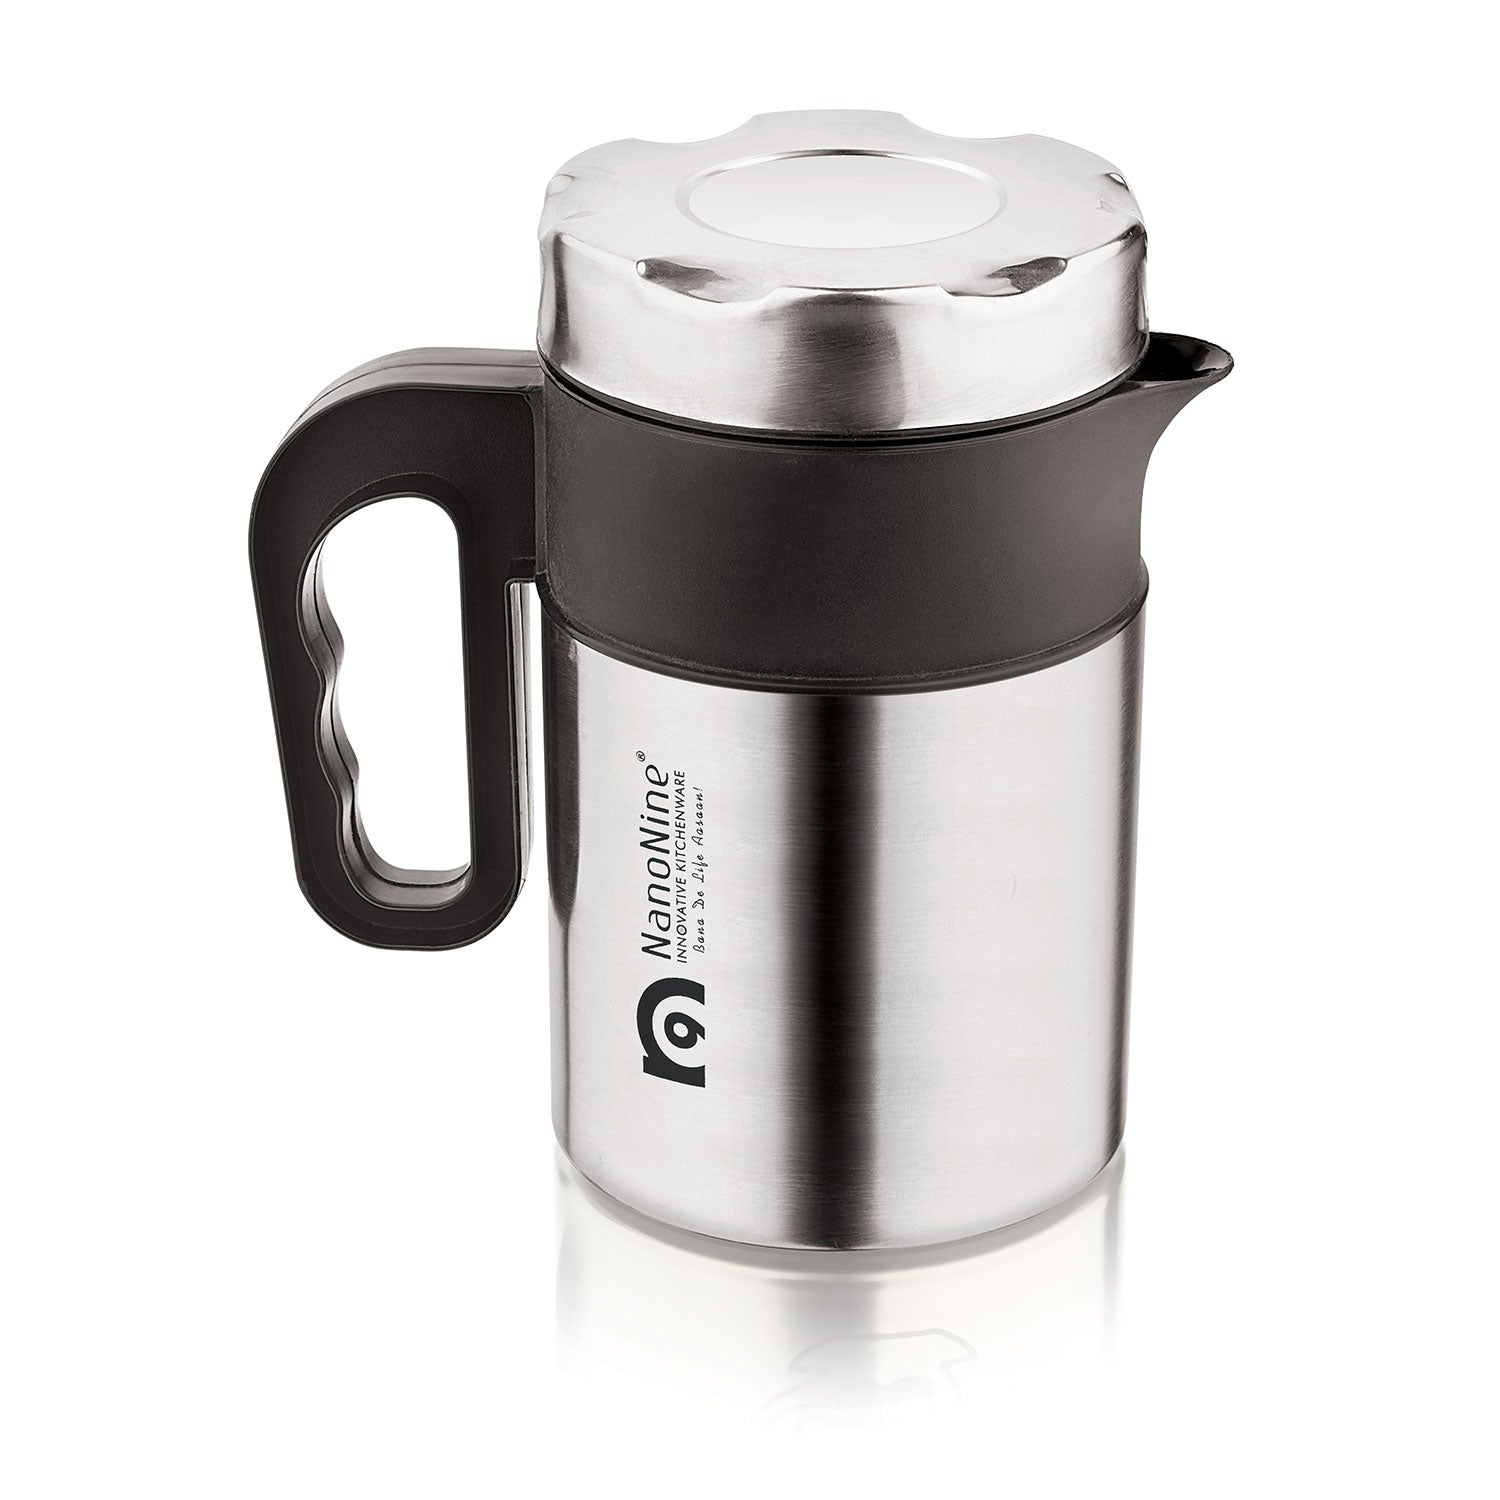 NanoNine T-Pot 1 L Double Wall Insulated Stainless Steel Flask.